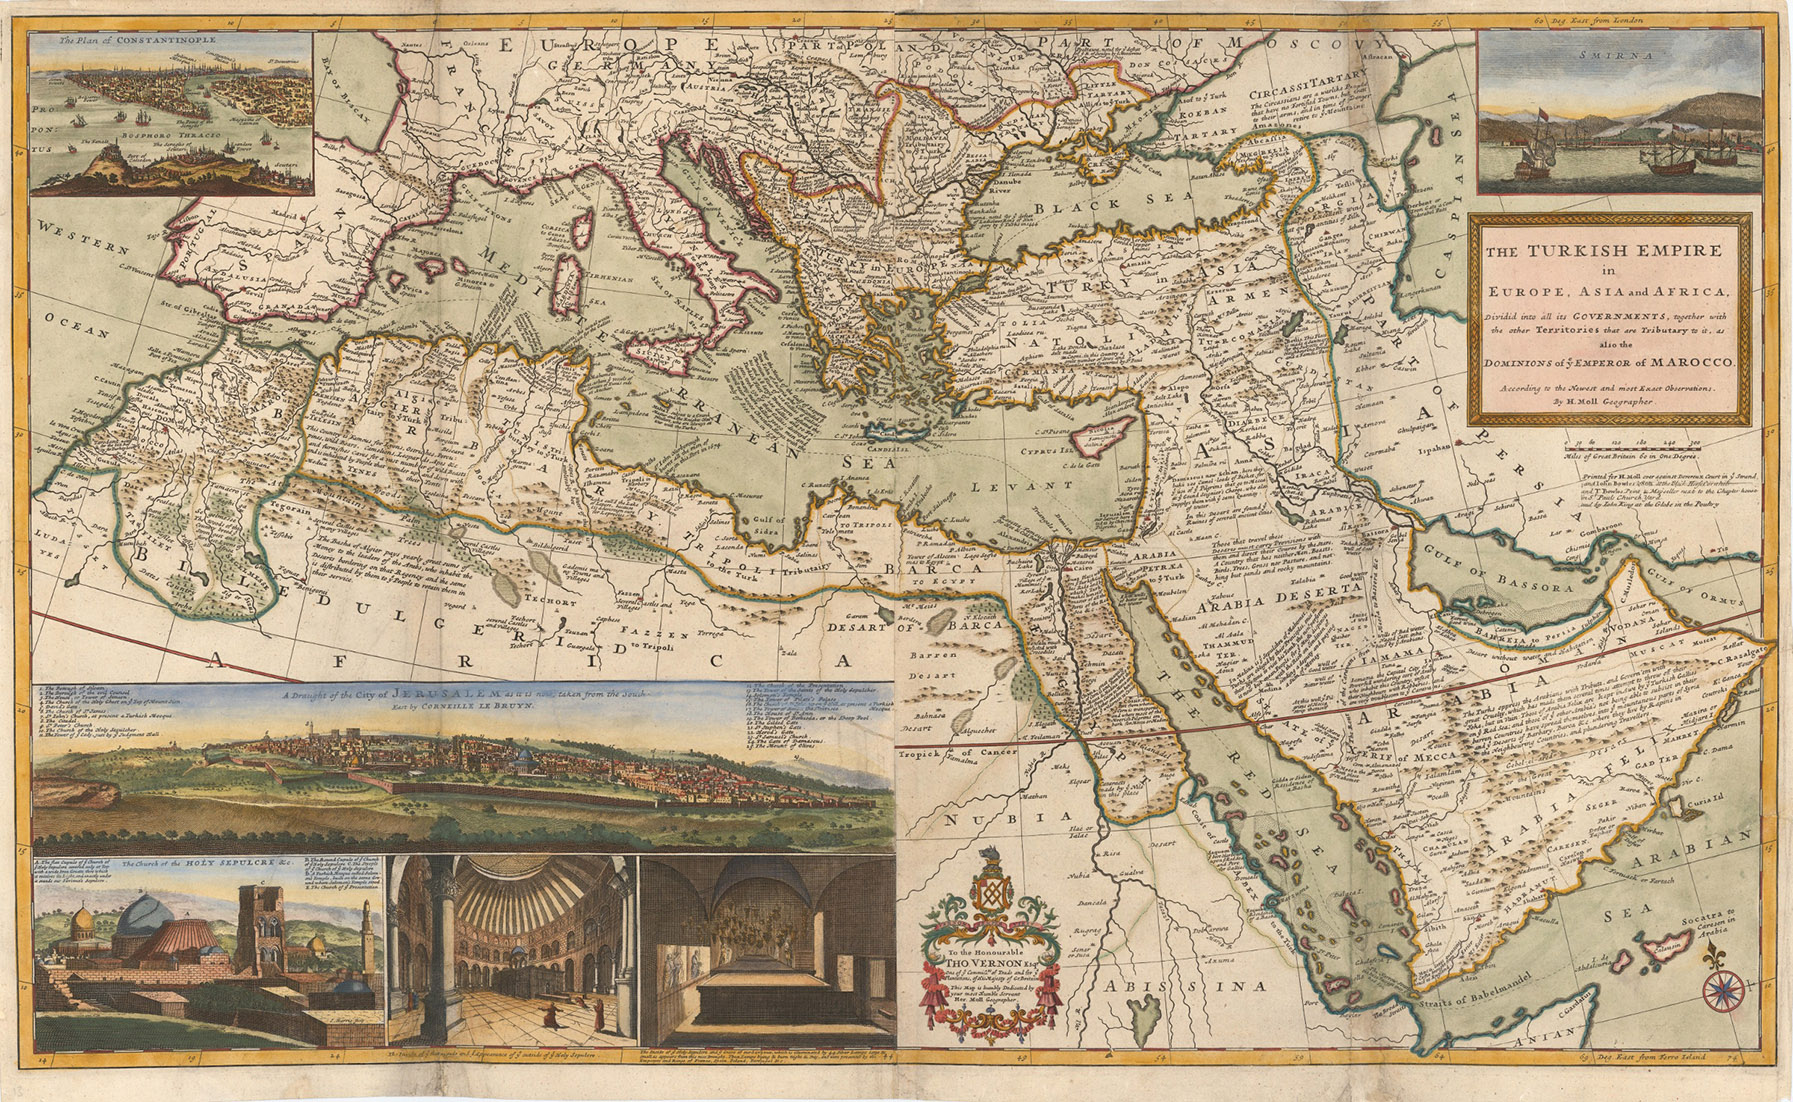 MOLL, Herman. - The Turkish empire in Europe, Asia and Africa, divided into all its governments, together with the other territories that are tributary to it, as also the dominions of the Emperor of Marocco.London, Herman Moll, John Bowles, Thomas Bowles & John King, ca. 1730. A large engraved map in two sheets (61 x 101 cm as assembled) at a scale of about 1:7,100,000, with 3 insets containing 6 topographic and architectural views. Coloured.